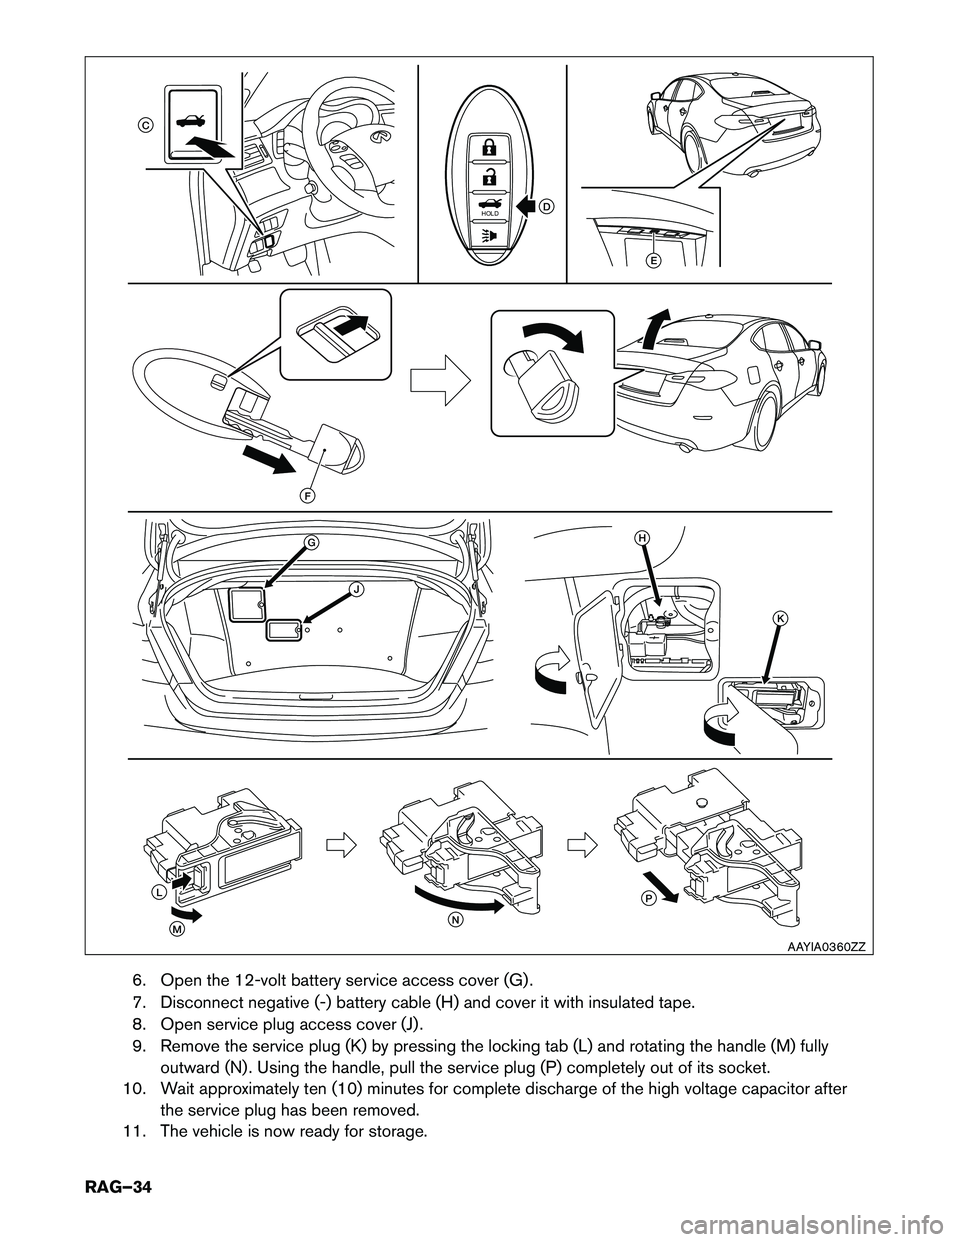 INFINITI Q70 HYBRID 2015  Roadside Assistance Guide 6. Open the 12-volt battery service access cover (G) . 
7. Disconnect negative (-) battery cable (H) and cover it with insulated tape.
8. Open service plug access cover (J) .
9. Remove the service plu